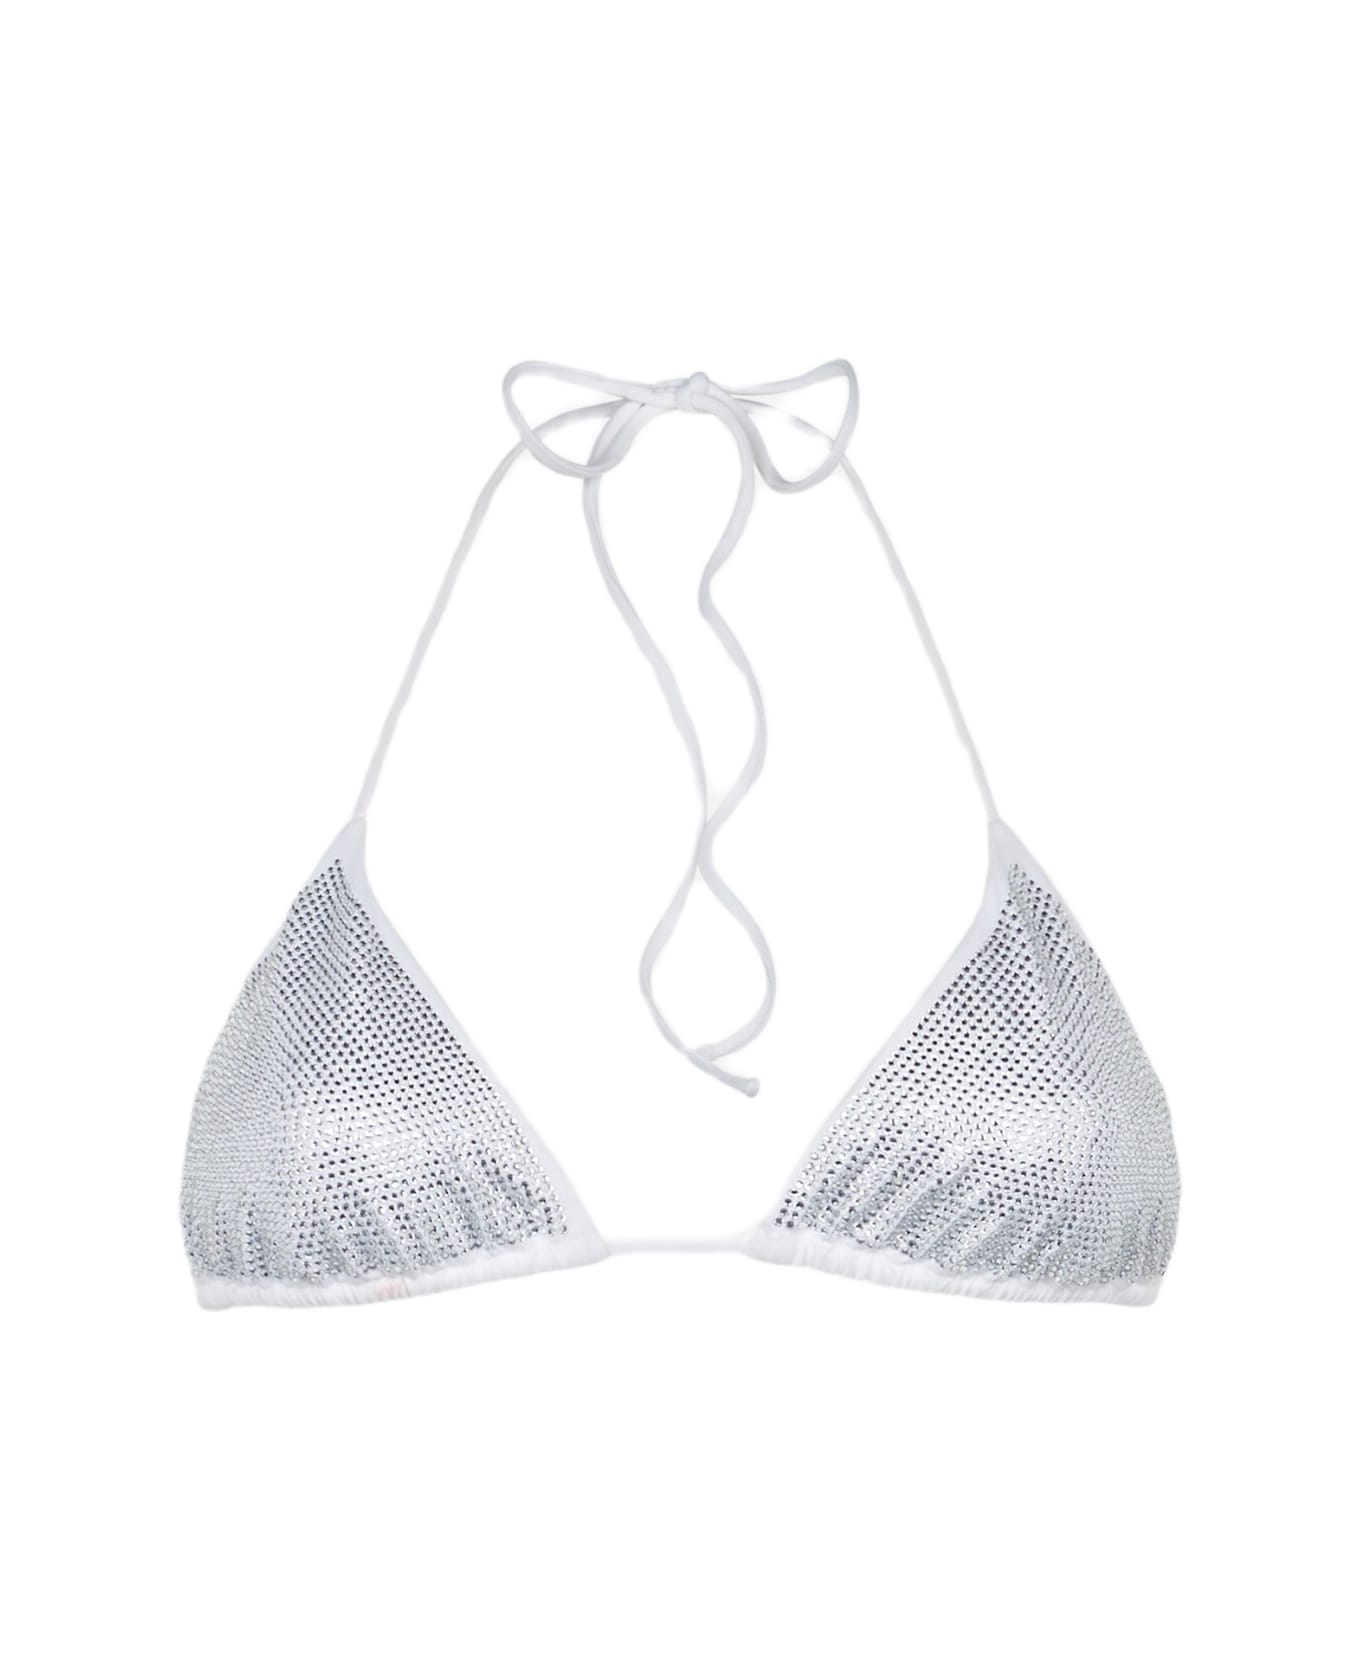 MC2 Saint Barth Woman Triangle Top Swimsuit With Silver Strass - WHITE 水着